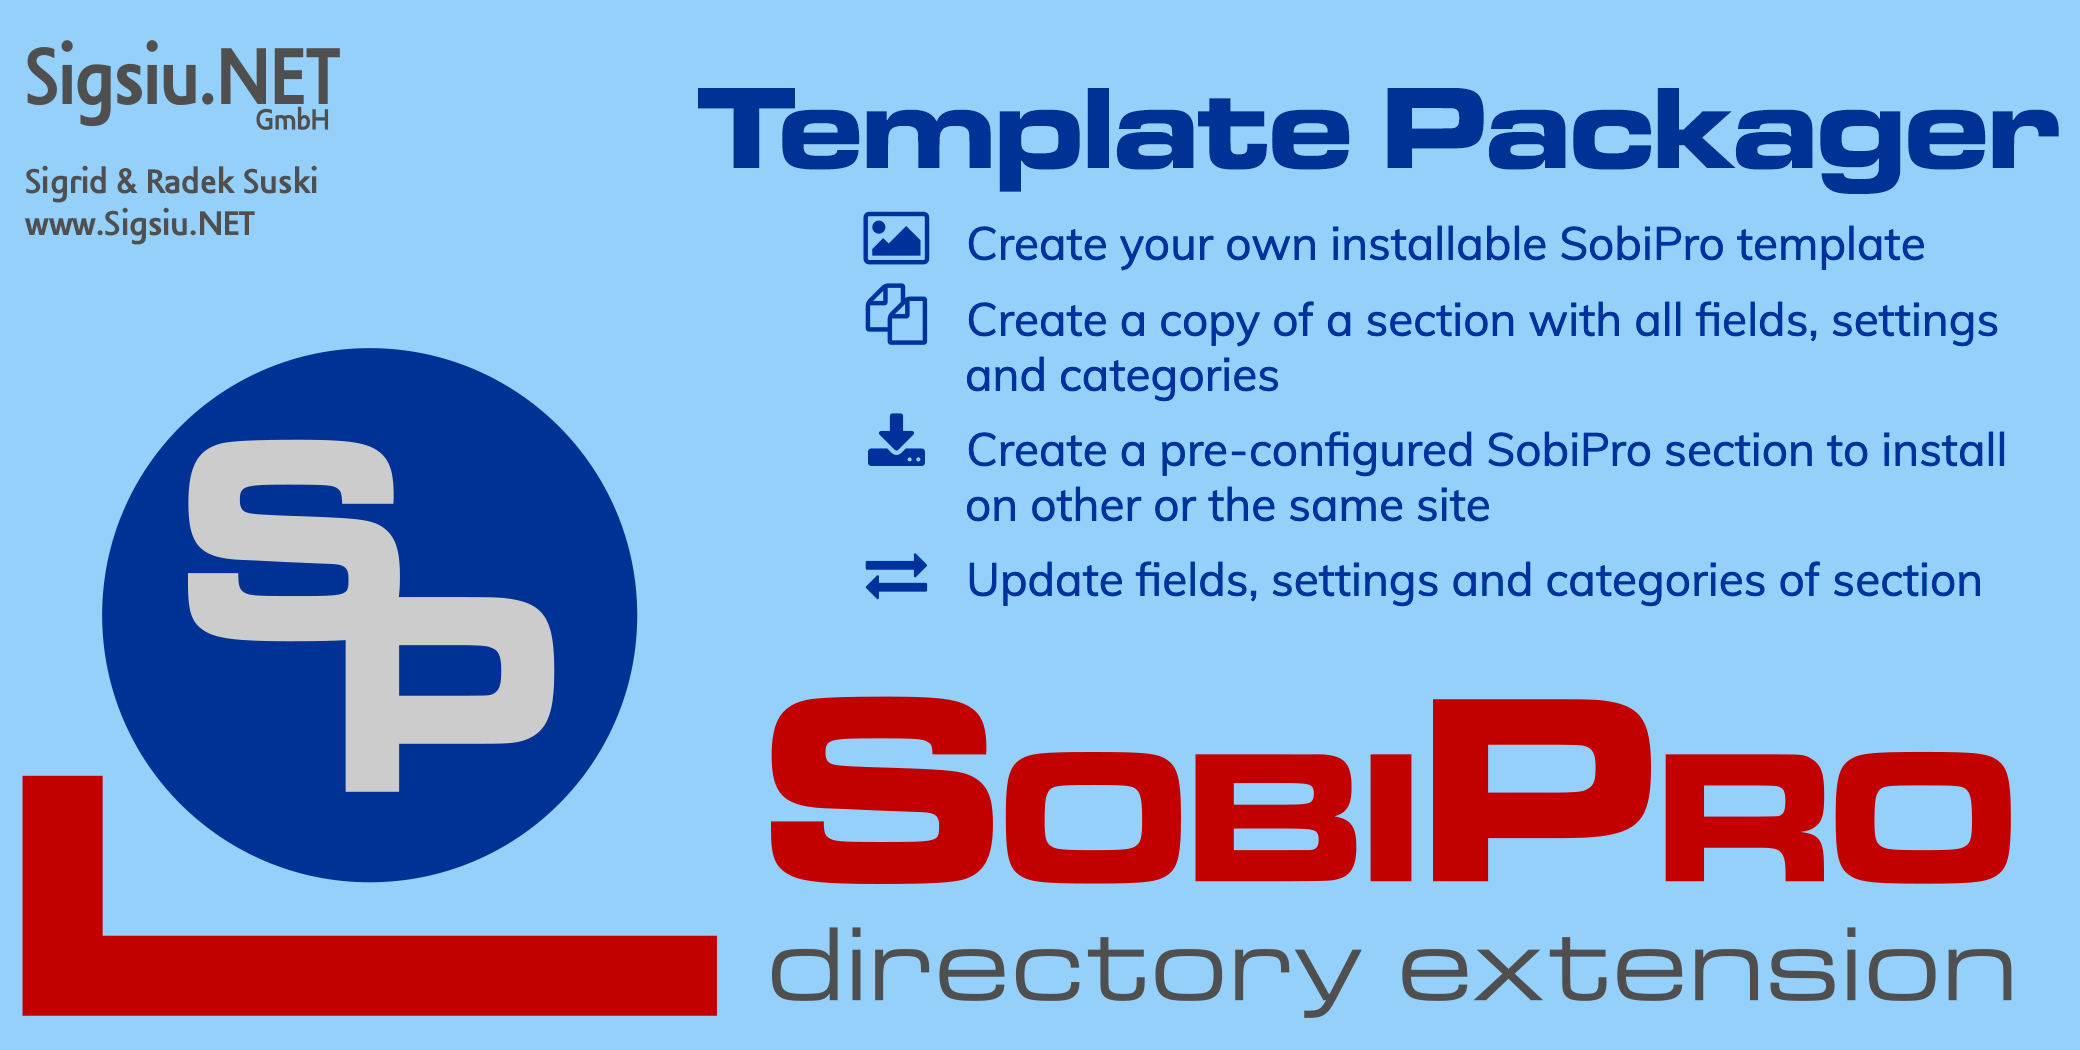 The Template Packager Application